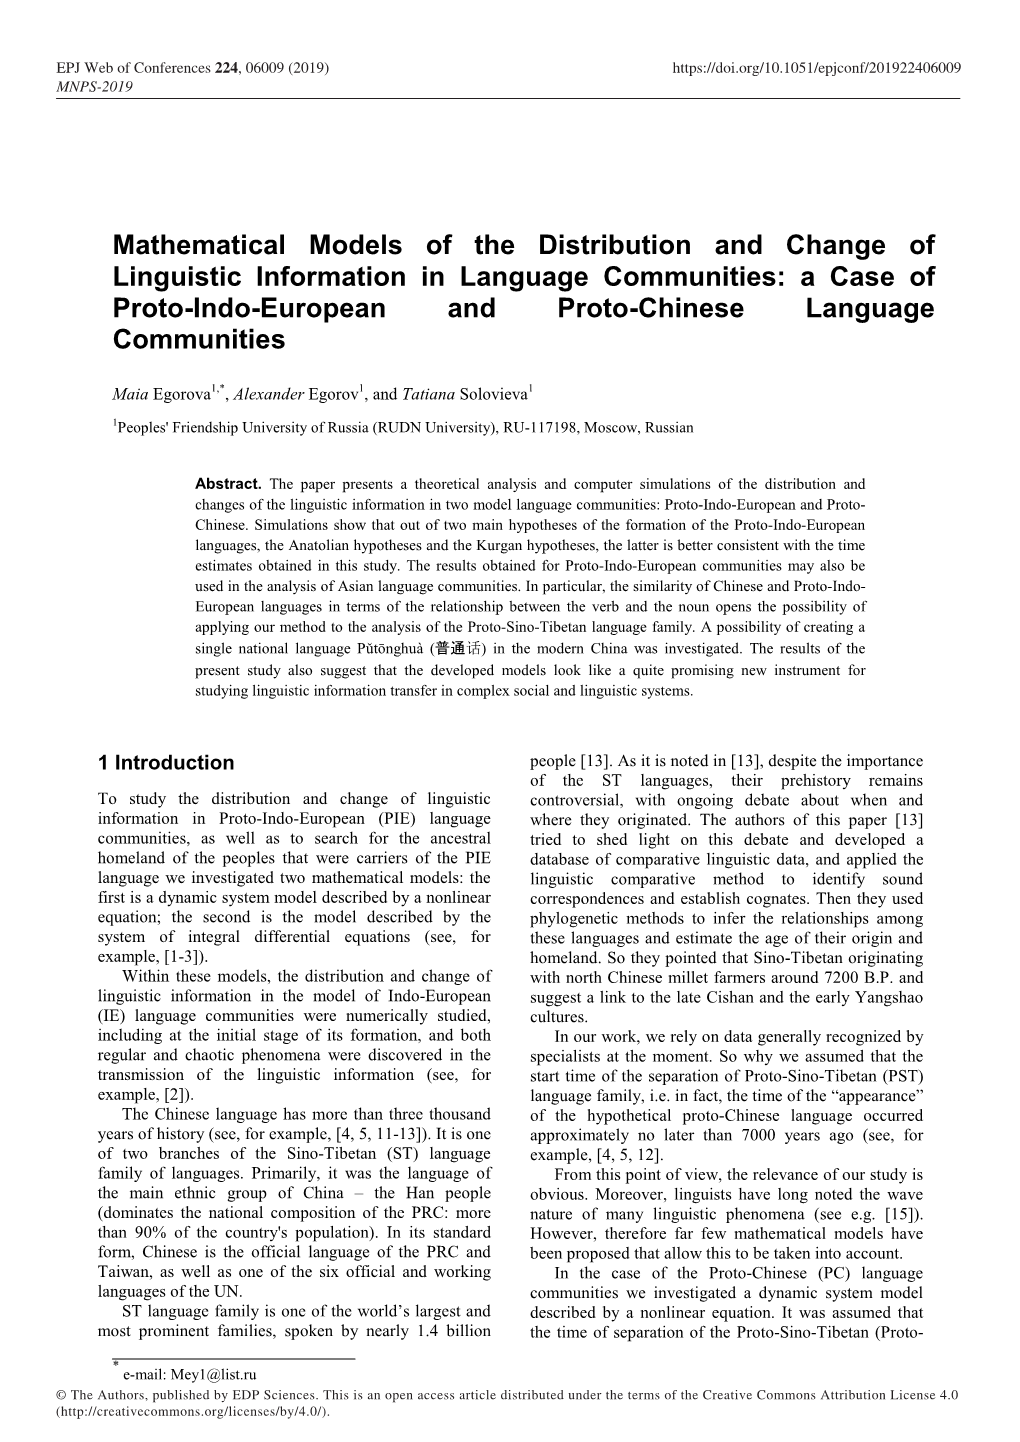 Mathematical Models of the Distribution and Change Of